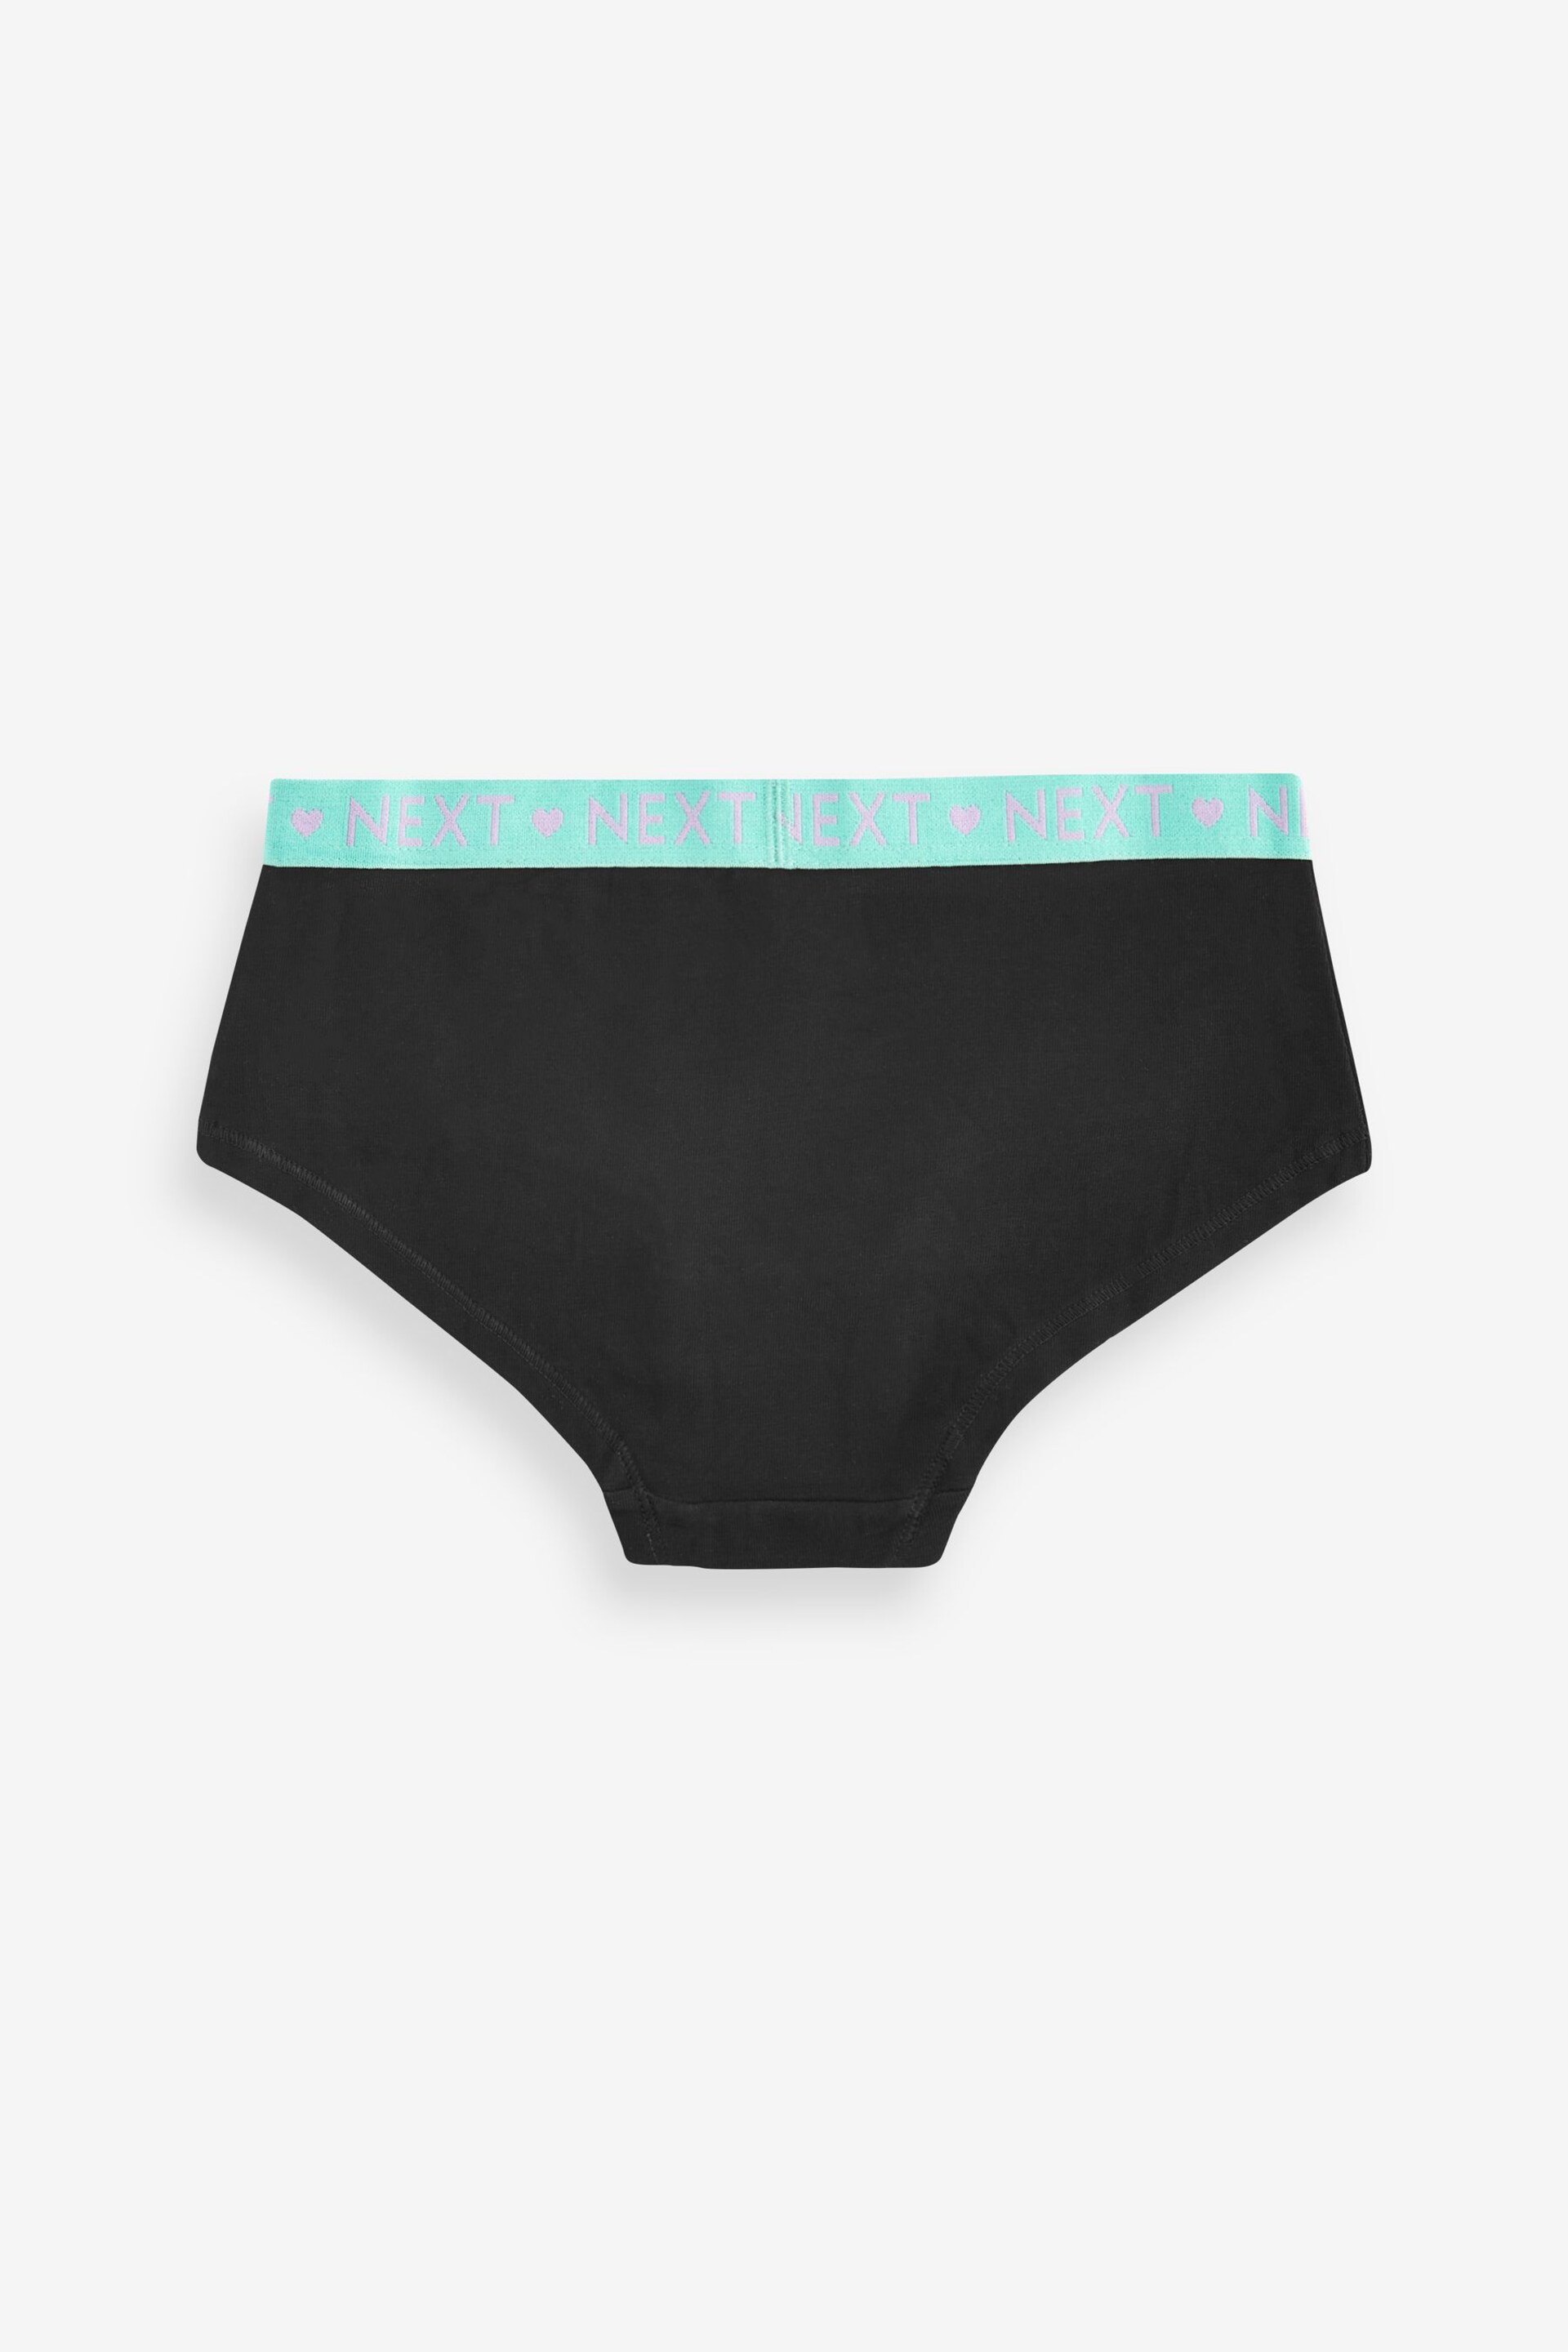 Black Bright Waistband Hipster 10 Pack (2-16yrs) - Image 11 of 12